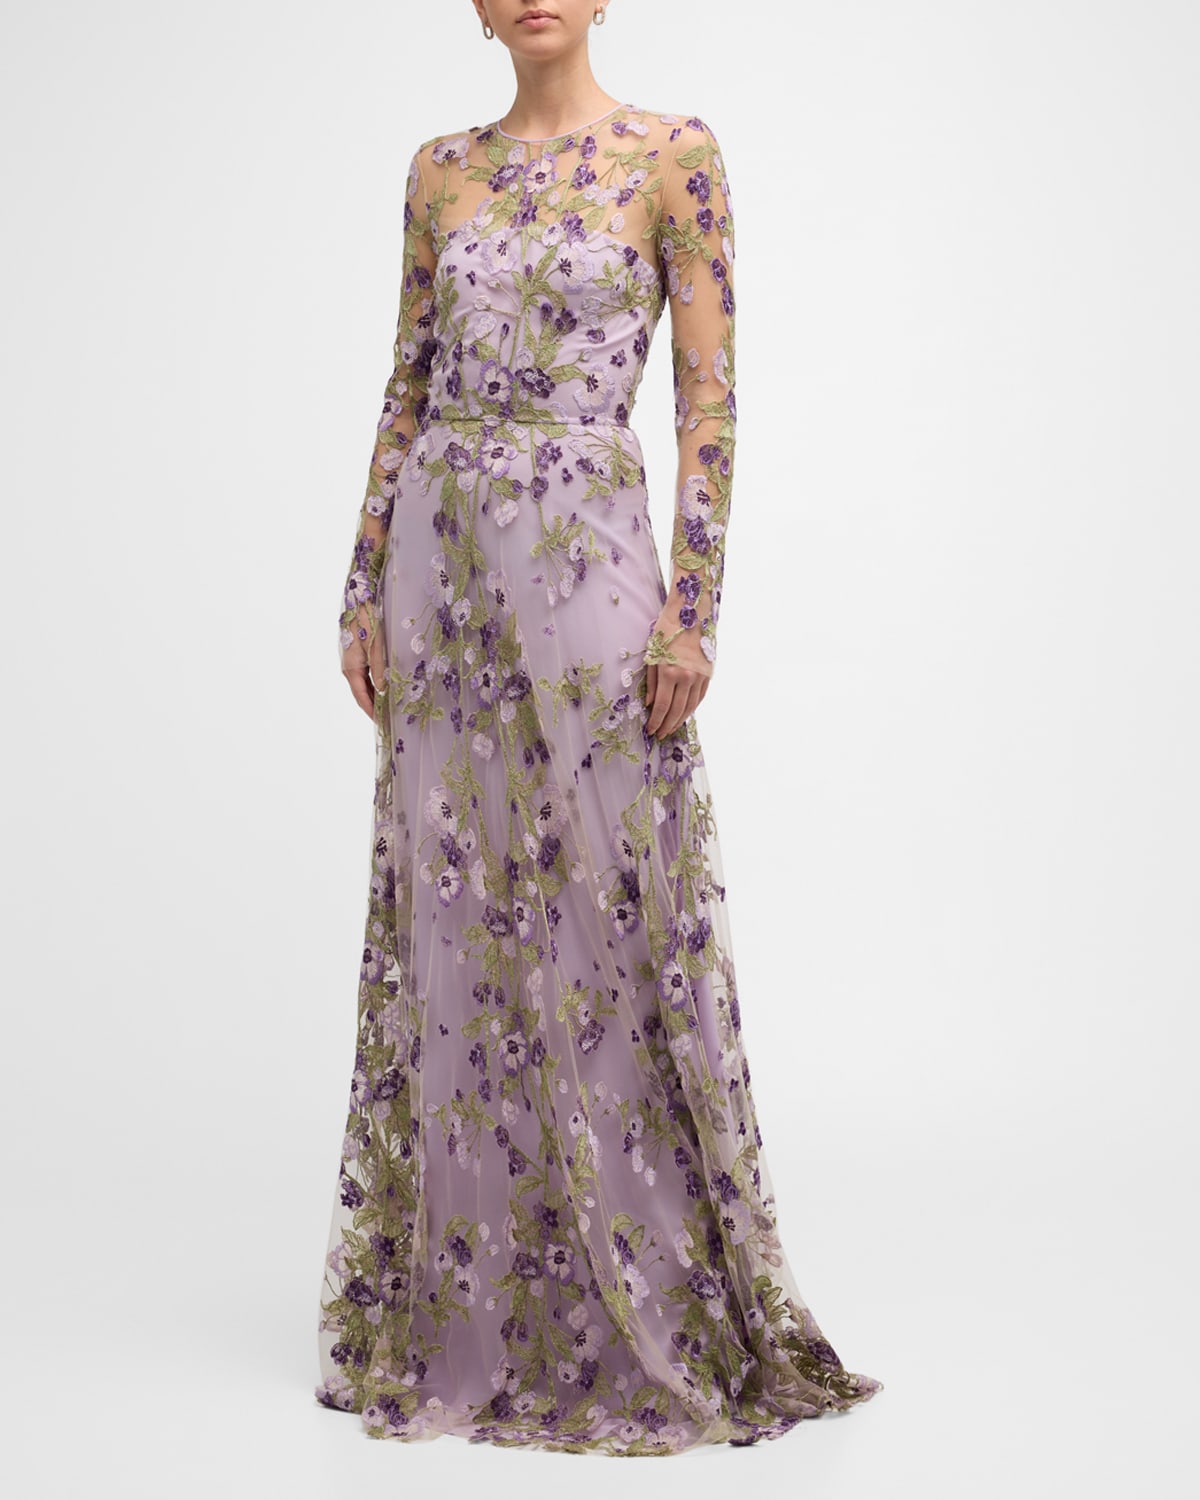 NAEEM KHAN EMBROIDERED FLORAL GOWN WITH SHEER OVERLAY